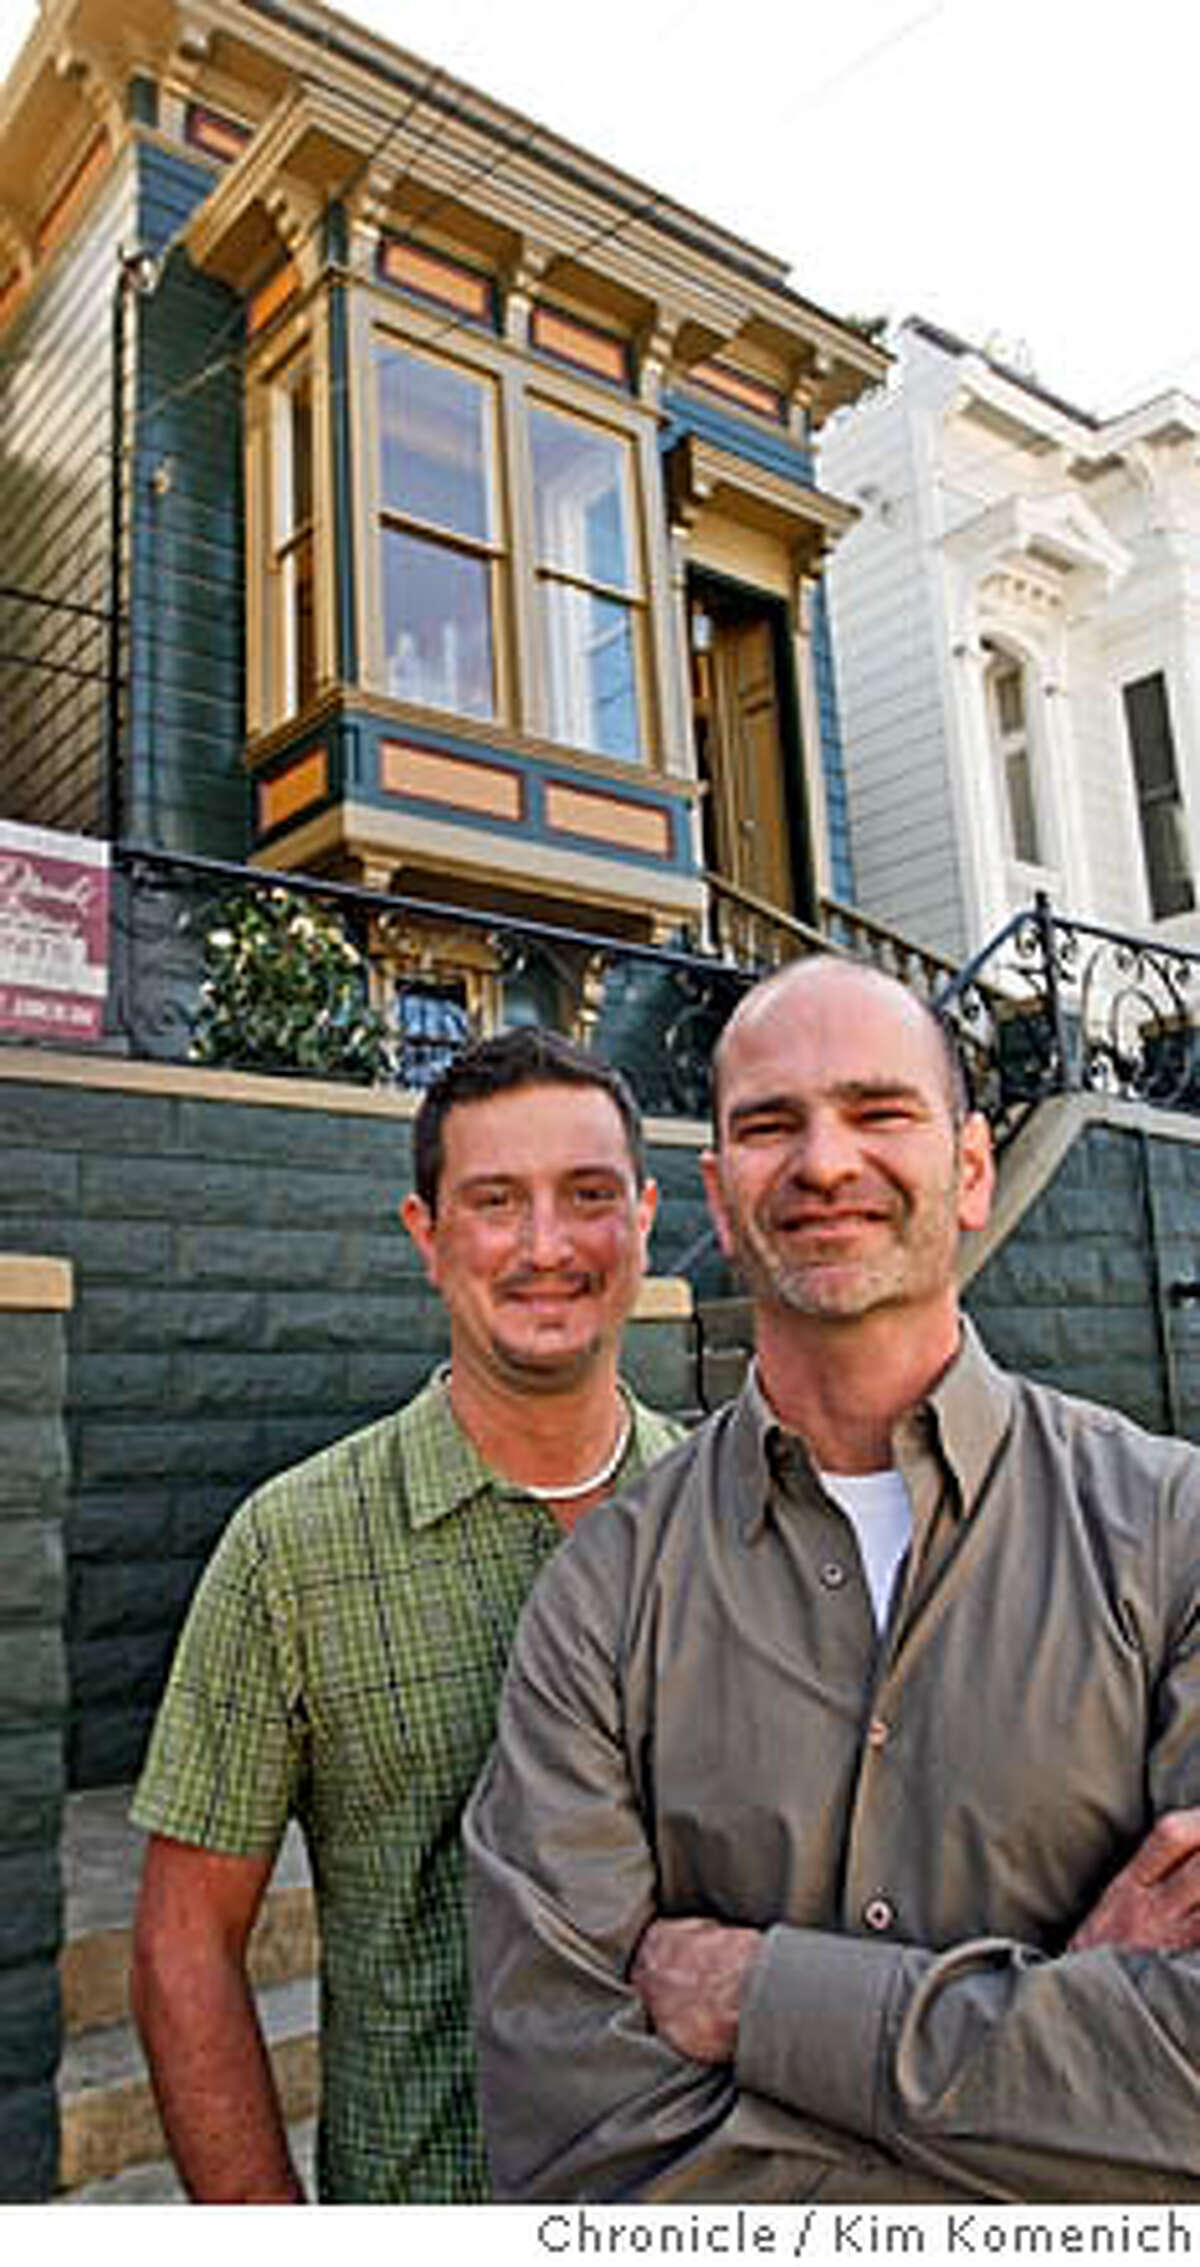 DUPLEX26_0049_KK.JPG L to R Brian Lackey, Malcolm Davis in front of the 19th Street duplex they own. Architect Malcolm Davis and his partner Brian Lackey own a duplex in the Castro. Originally, the house was being sold as a tear-down, even with plans for a new 3,500 square foot house, included. Davis decided to go a different way, preserving the existing building. What we now have is two one-bedroom units, only about 700 square feet each, but they feel a whole lot bigger because of creative use of space and light. San Francisco Chronicle photo by Kim Komenich 2/21/06 � Copyright 2006 Kim Komenich/San Francisco Chronicle